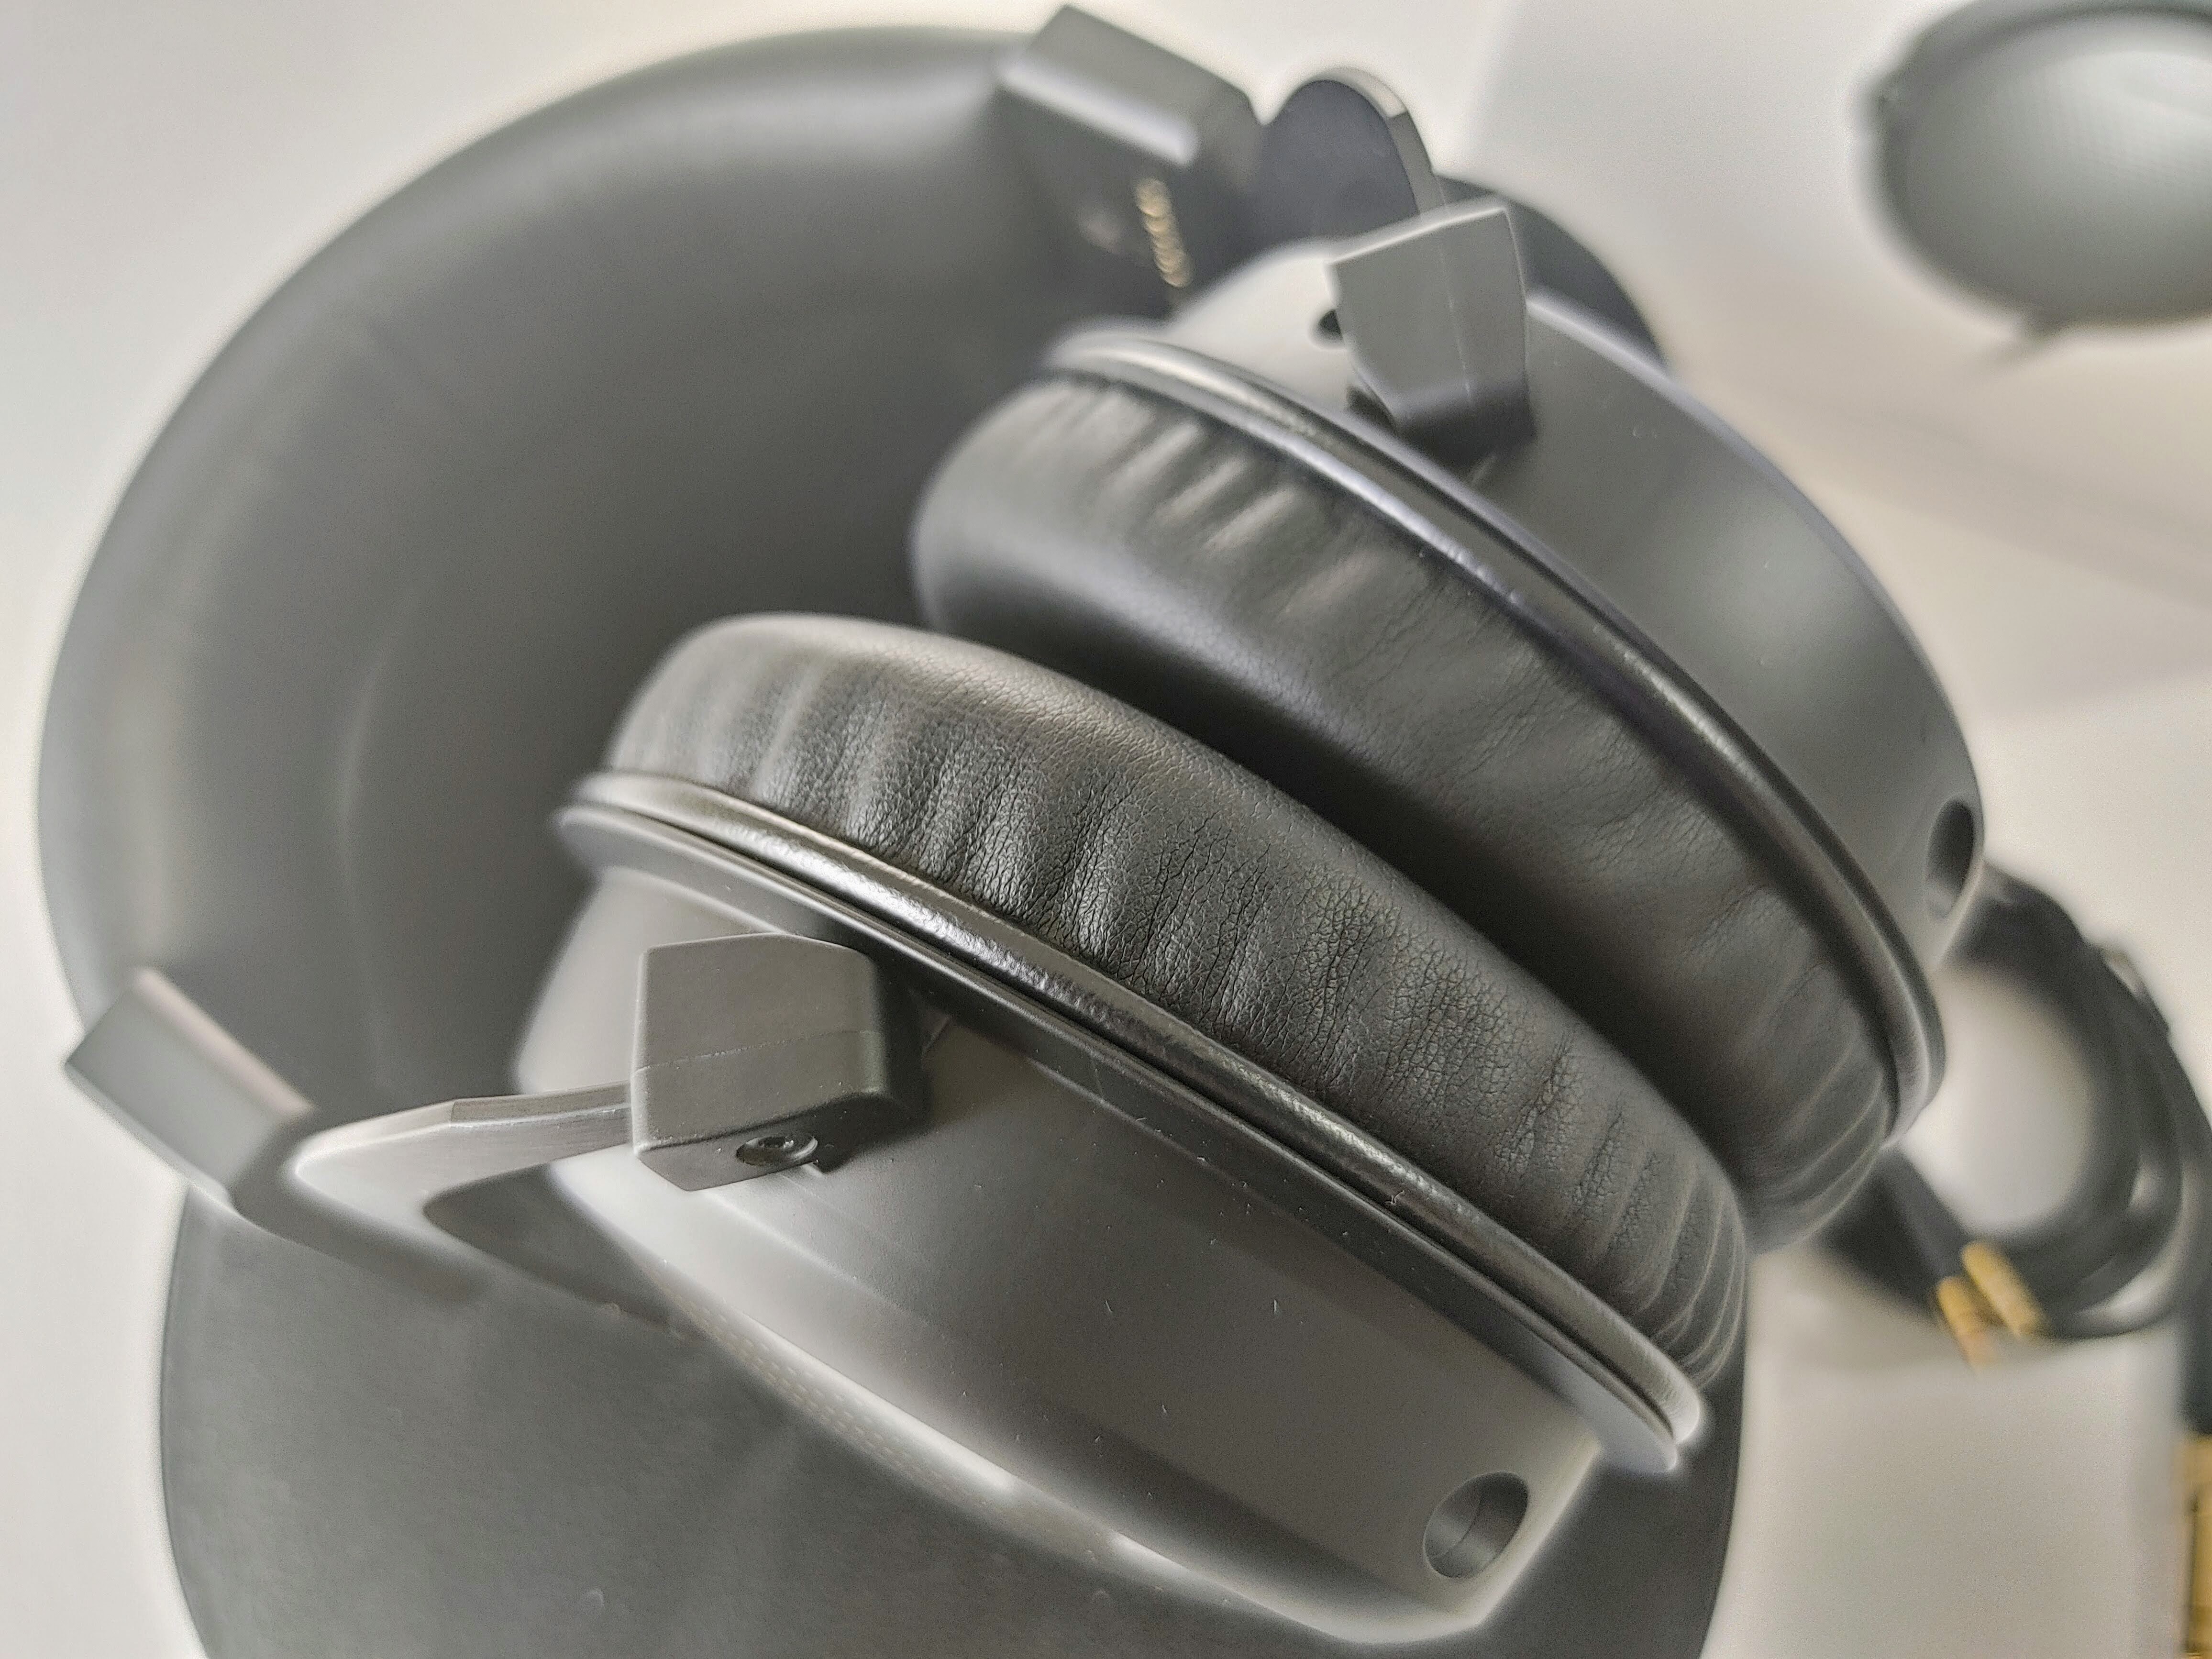 Beyerdynamic T5 (3rd Generation) Review: These Headphones Are 